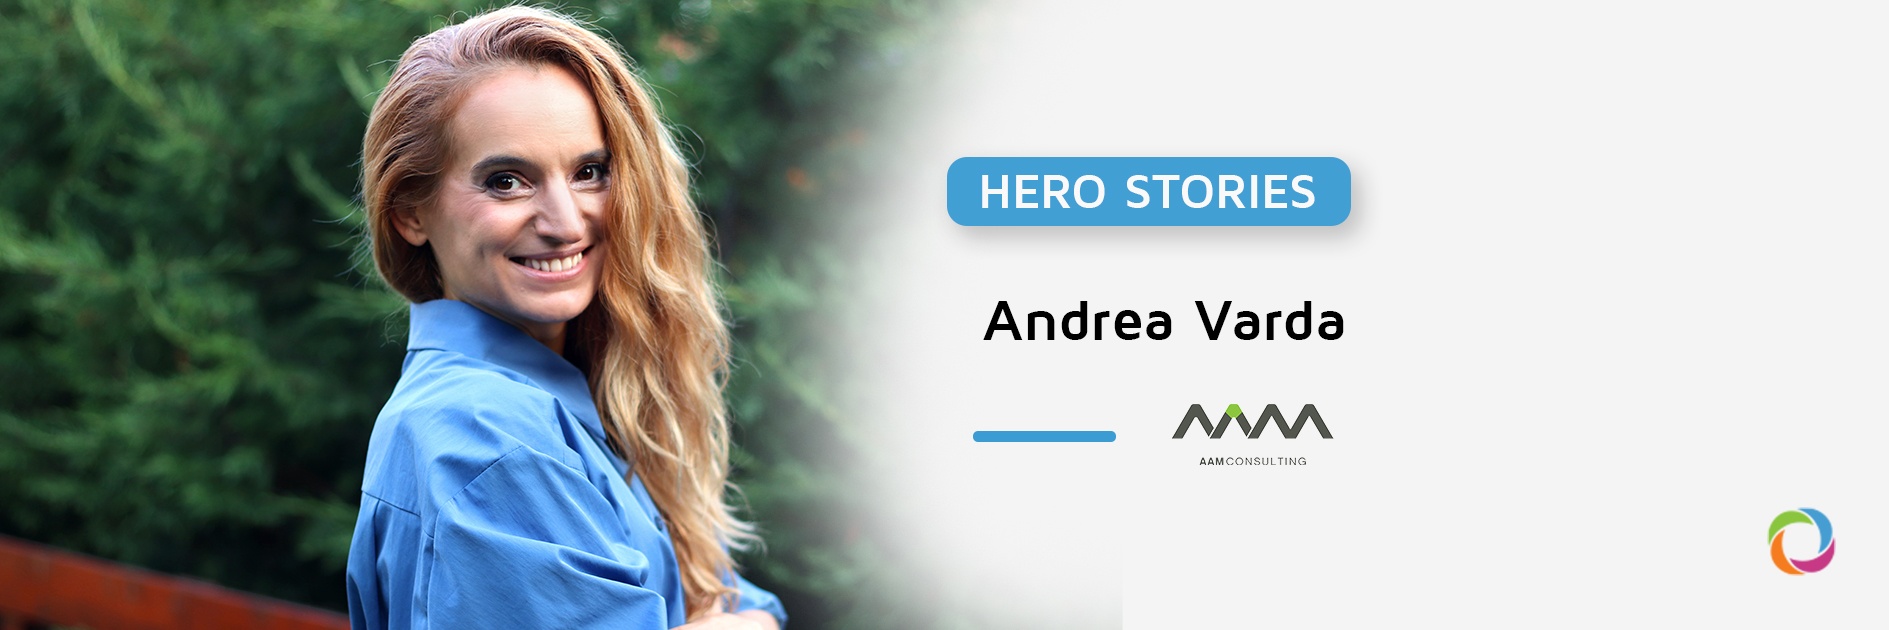 Hero Stories I Andrea Varda: “We can do great things by cooperating successfully together”